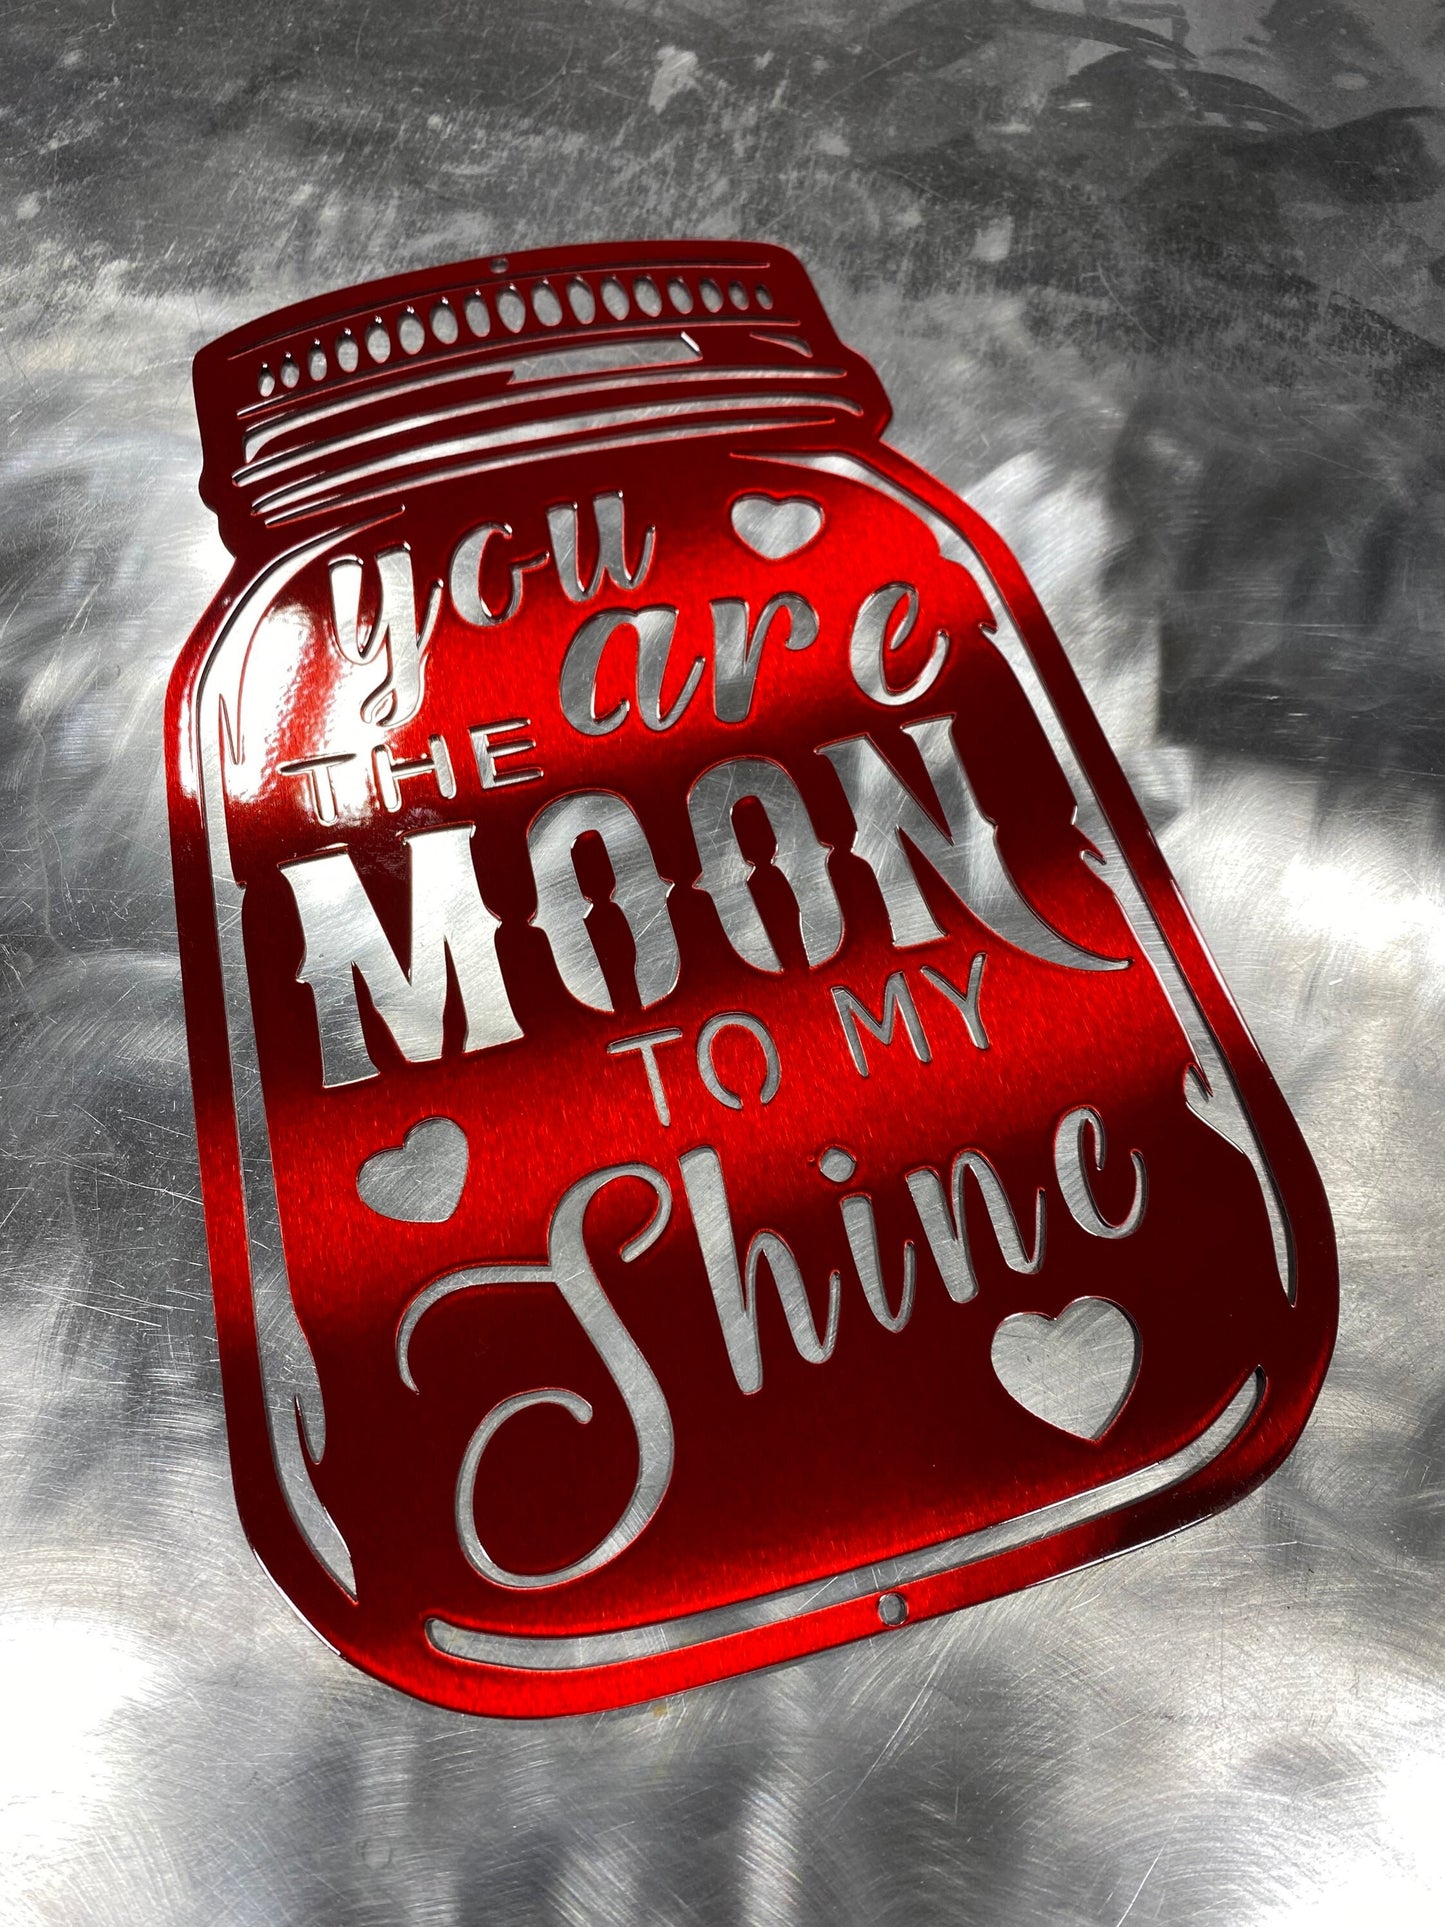 You are the moon to my shine! Valentine’s Day gift, Mother’s Day gift, anniversary gift